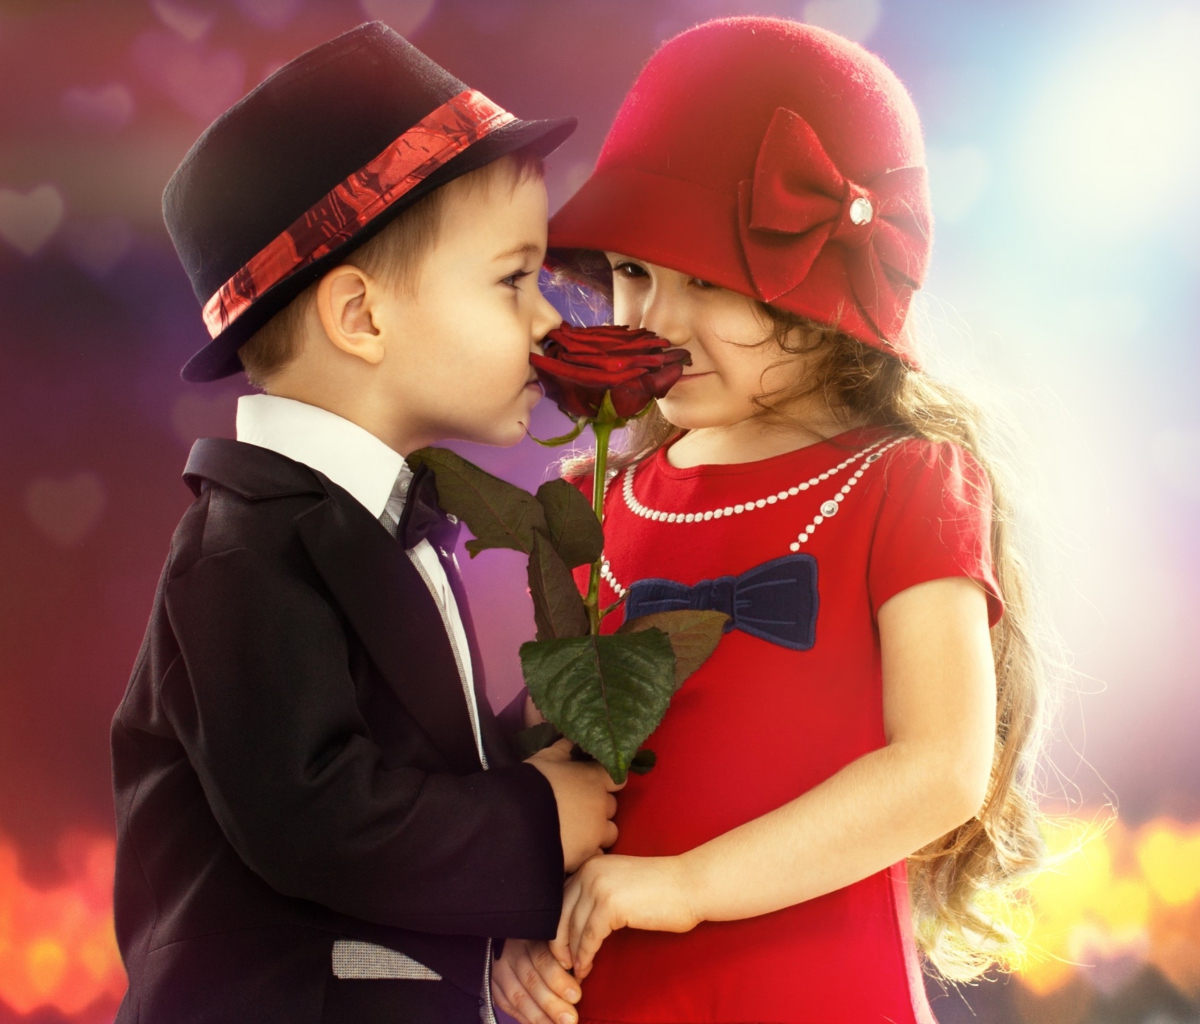 Cute Kids Couple With Rose wallpaper 1200x1024